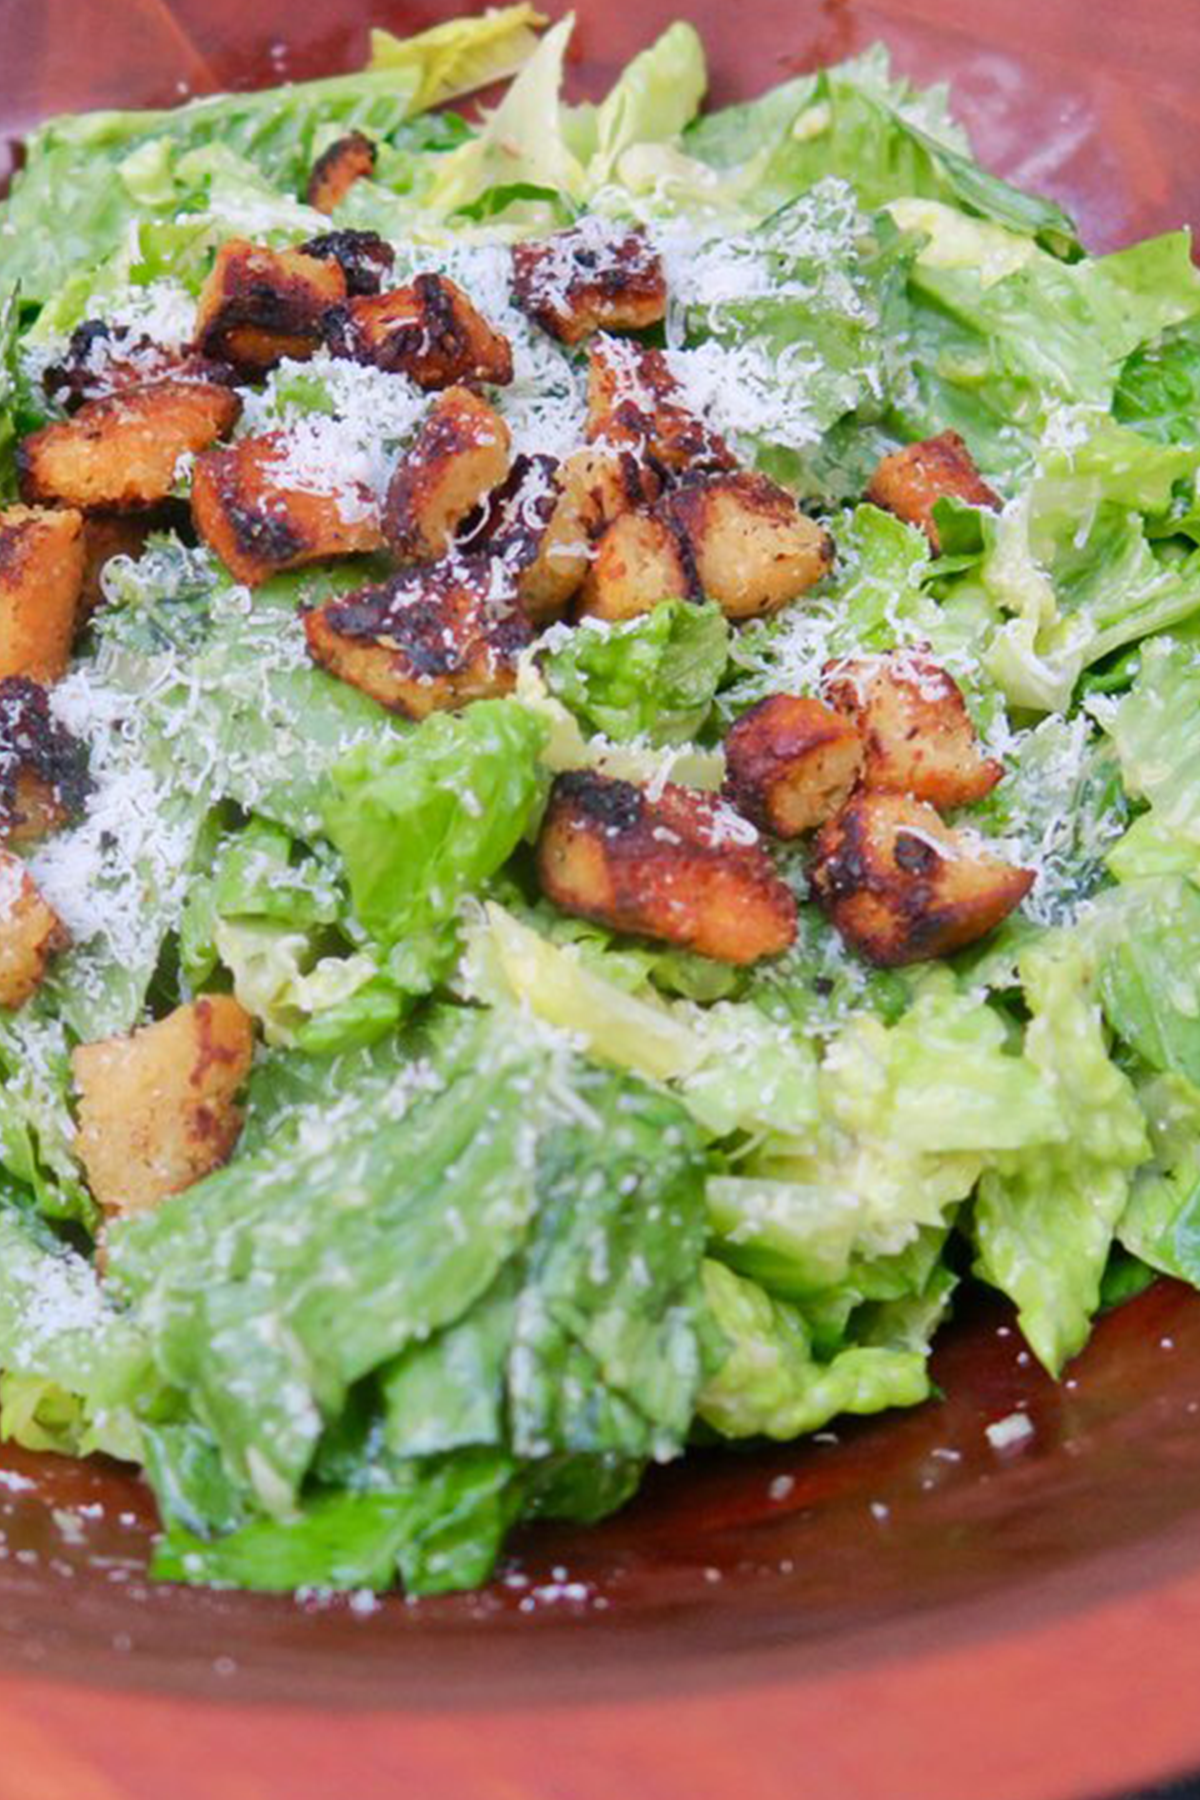 How To Make Homemade Croutons (Perfect for Soups and Salads!) - Chef Savvy